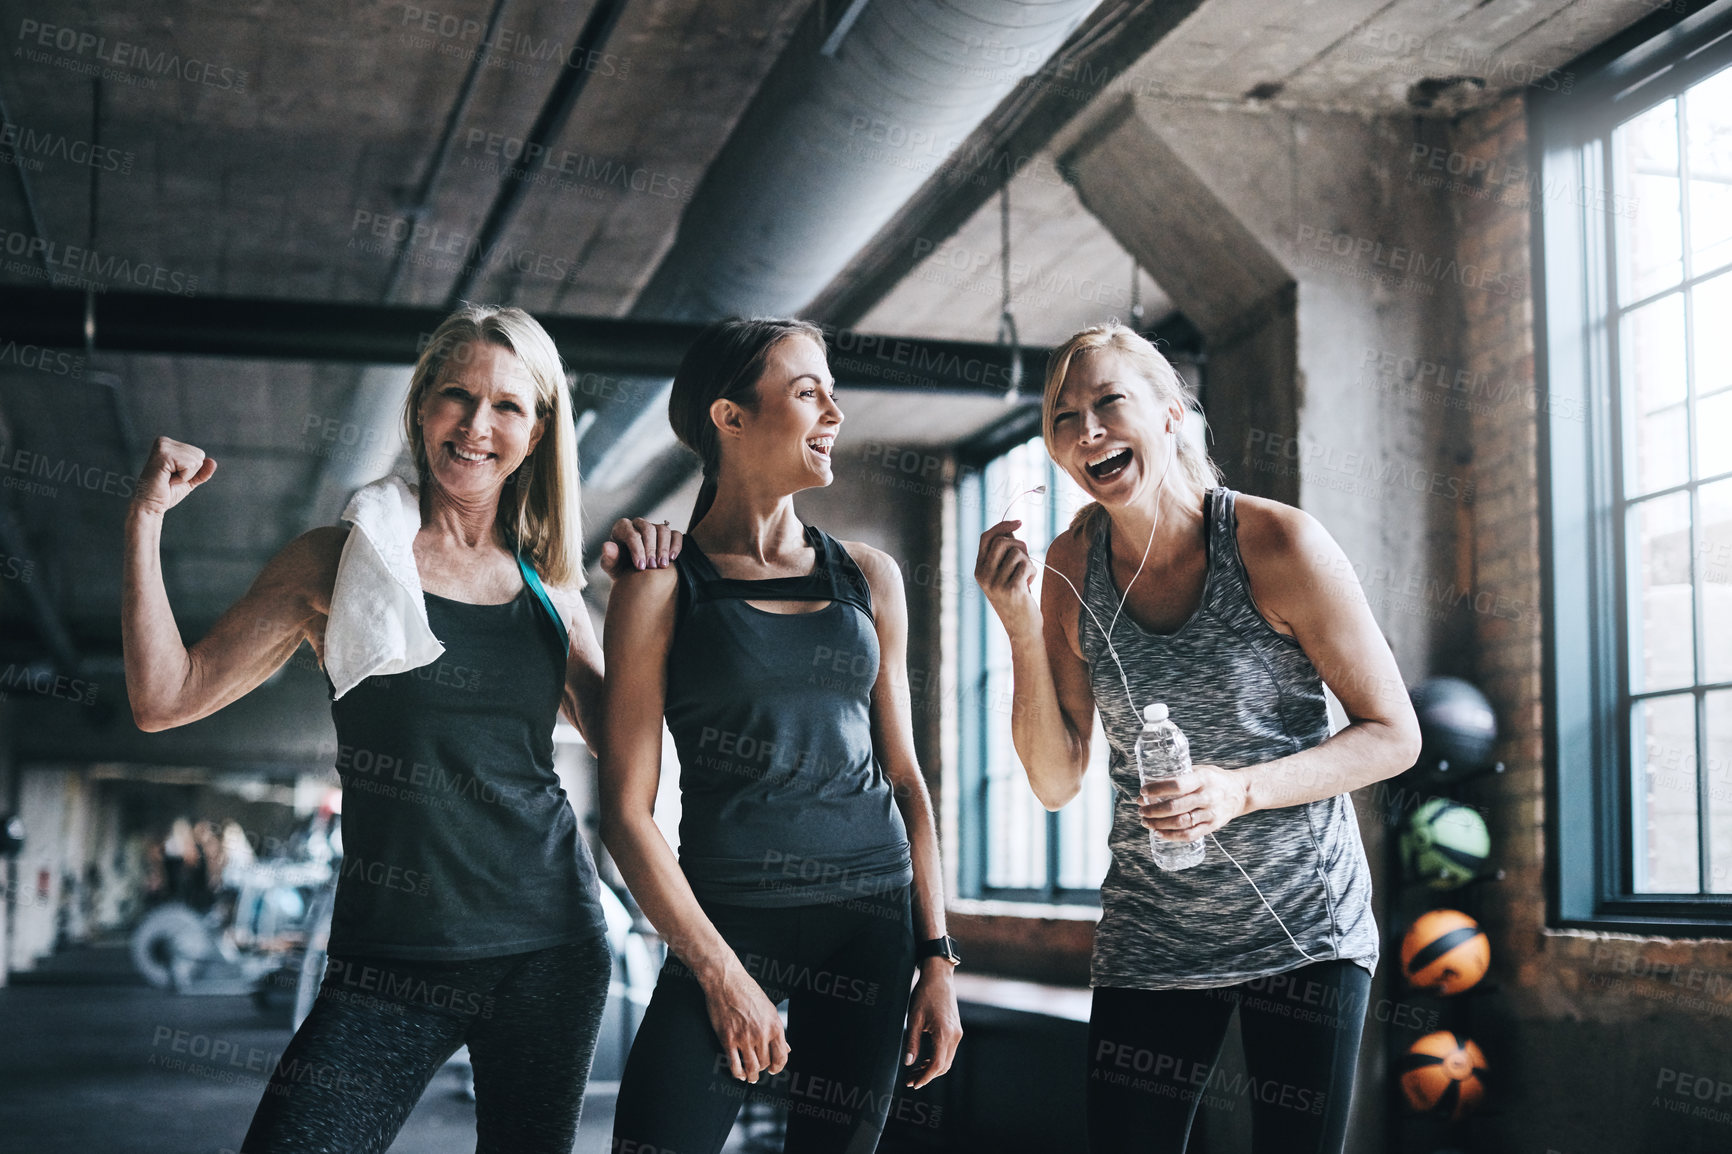 Buy stock photo Cropped portrait of three attractive and athletic women working out in the gym